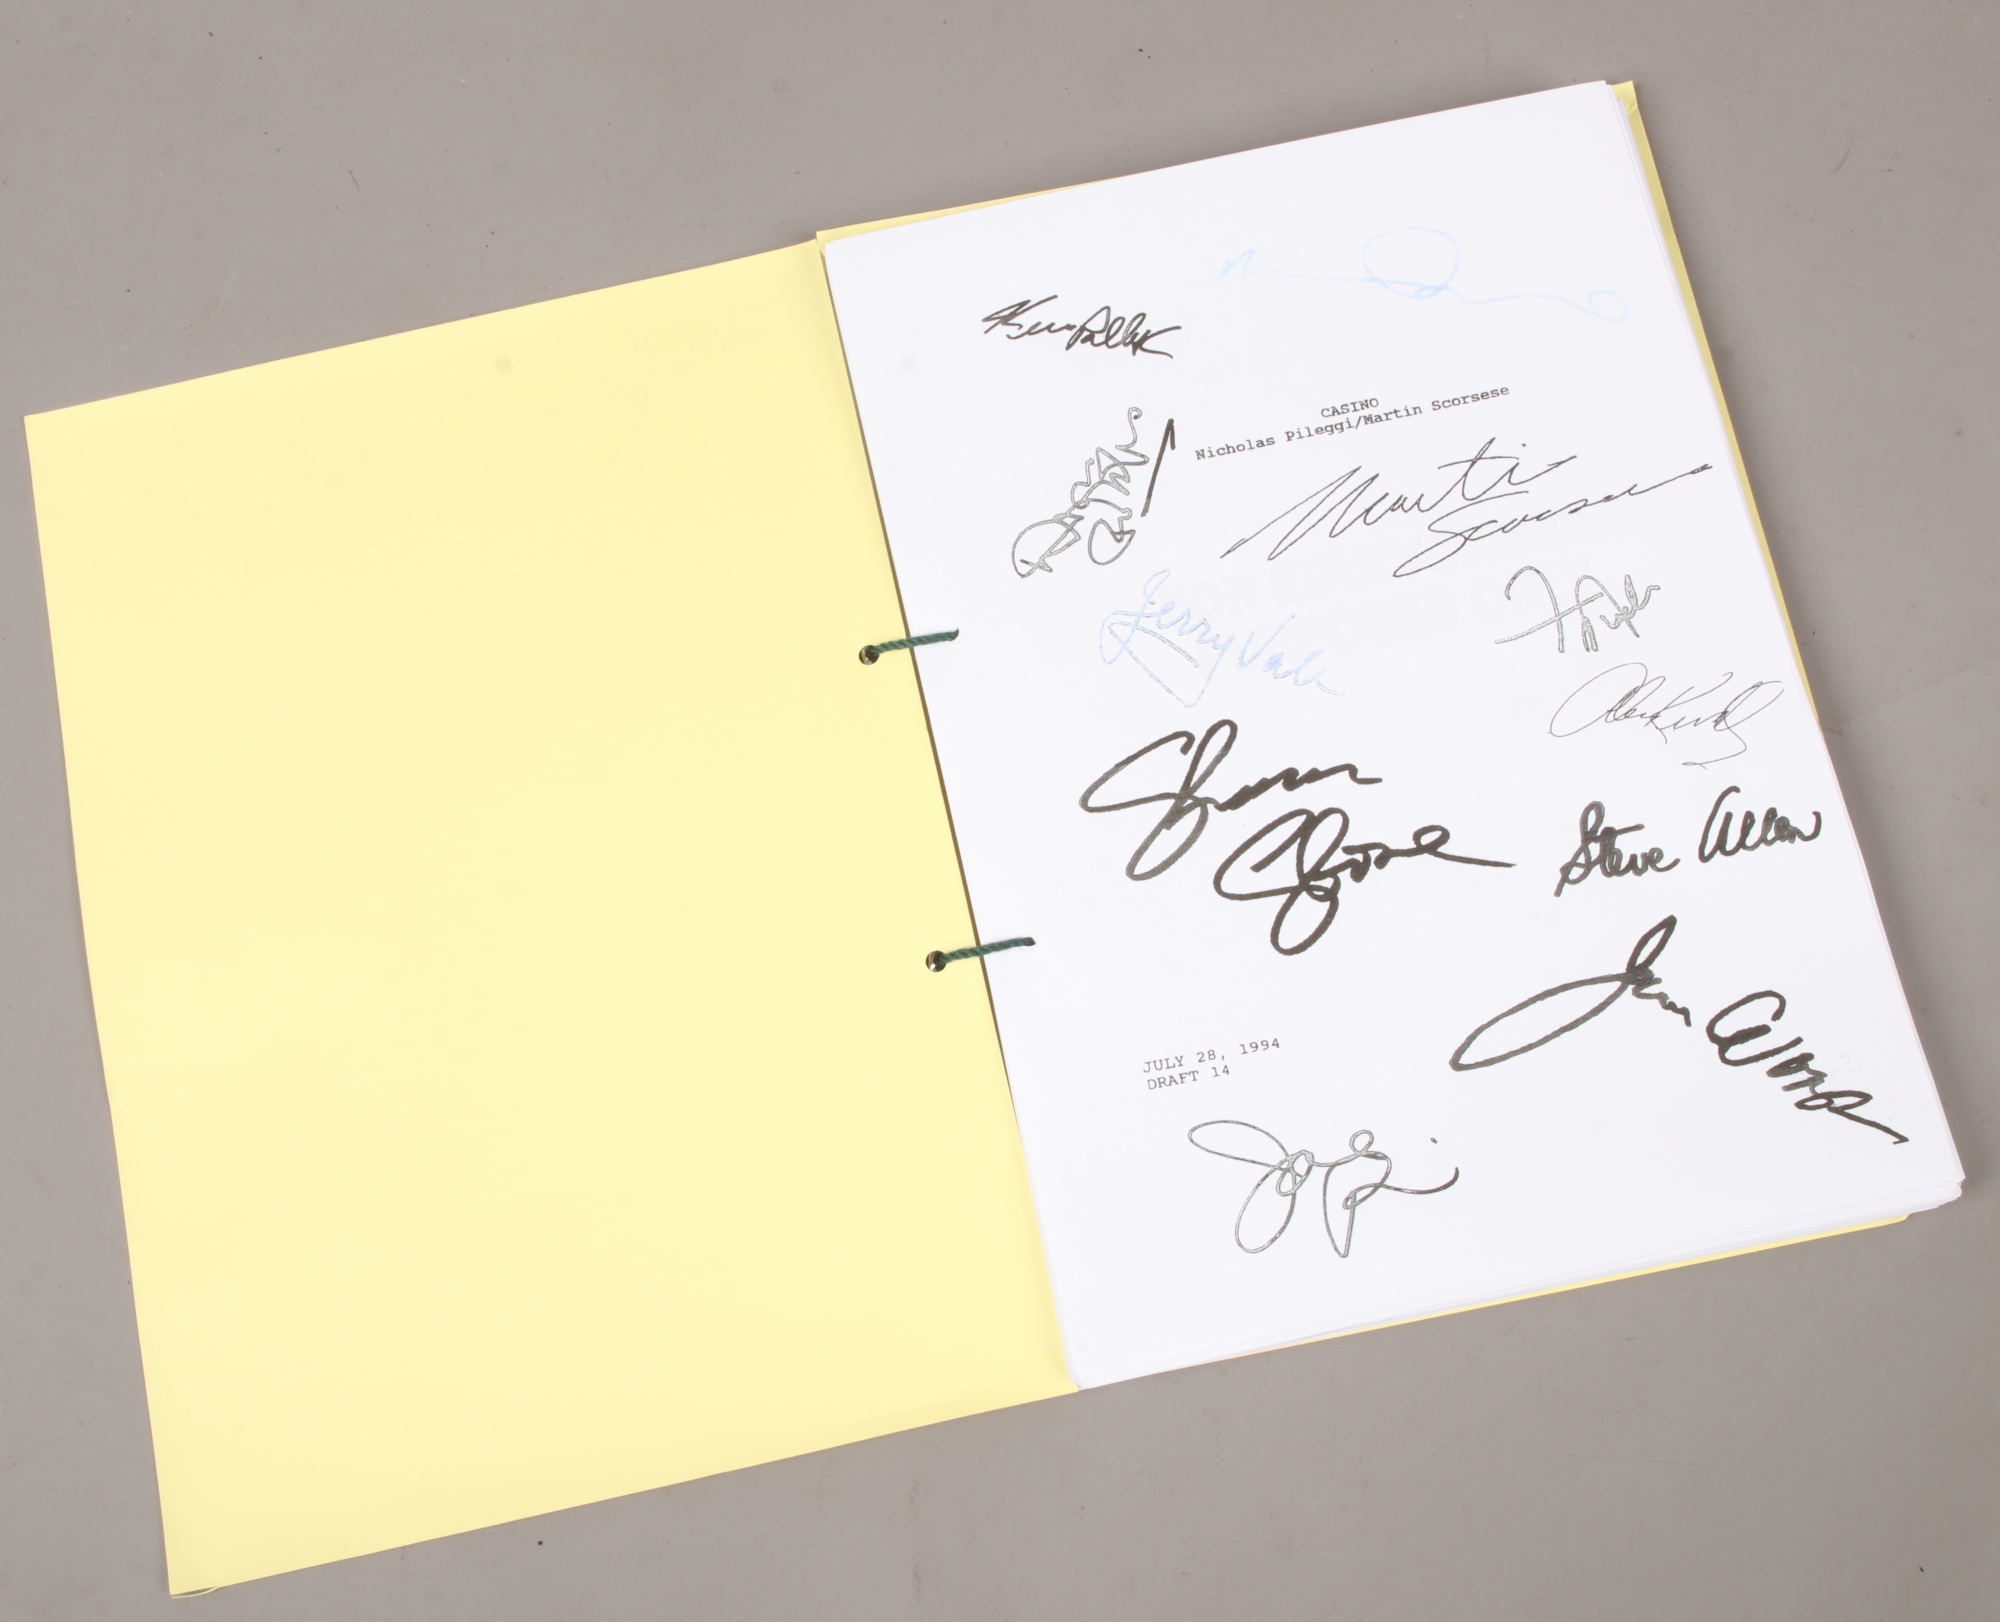 A reprint script of the film Casino with printed signatures.